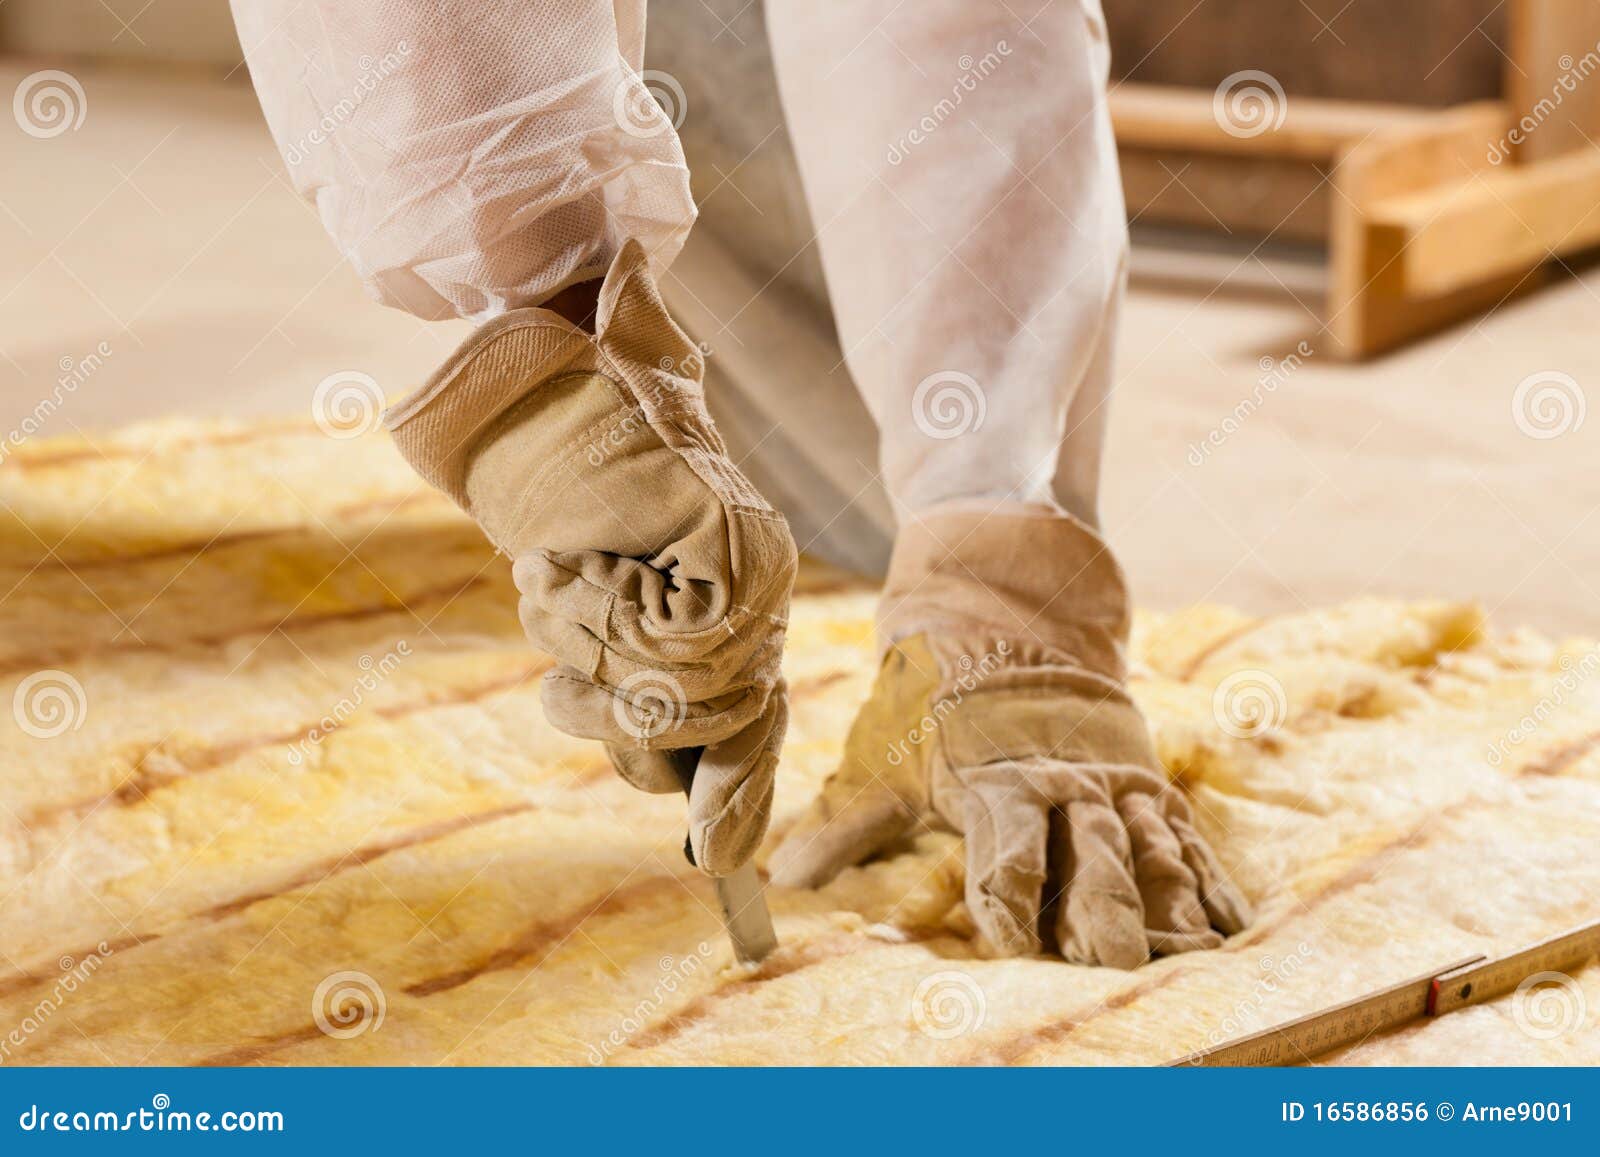 man cutting insulation material for building